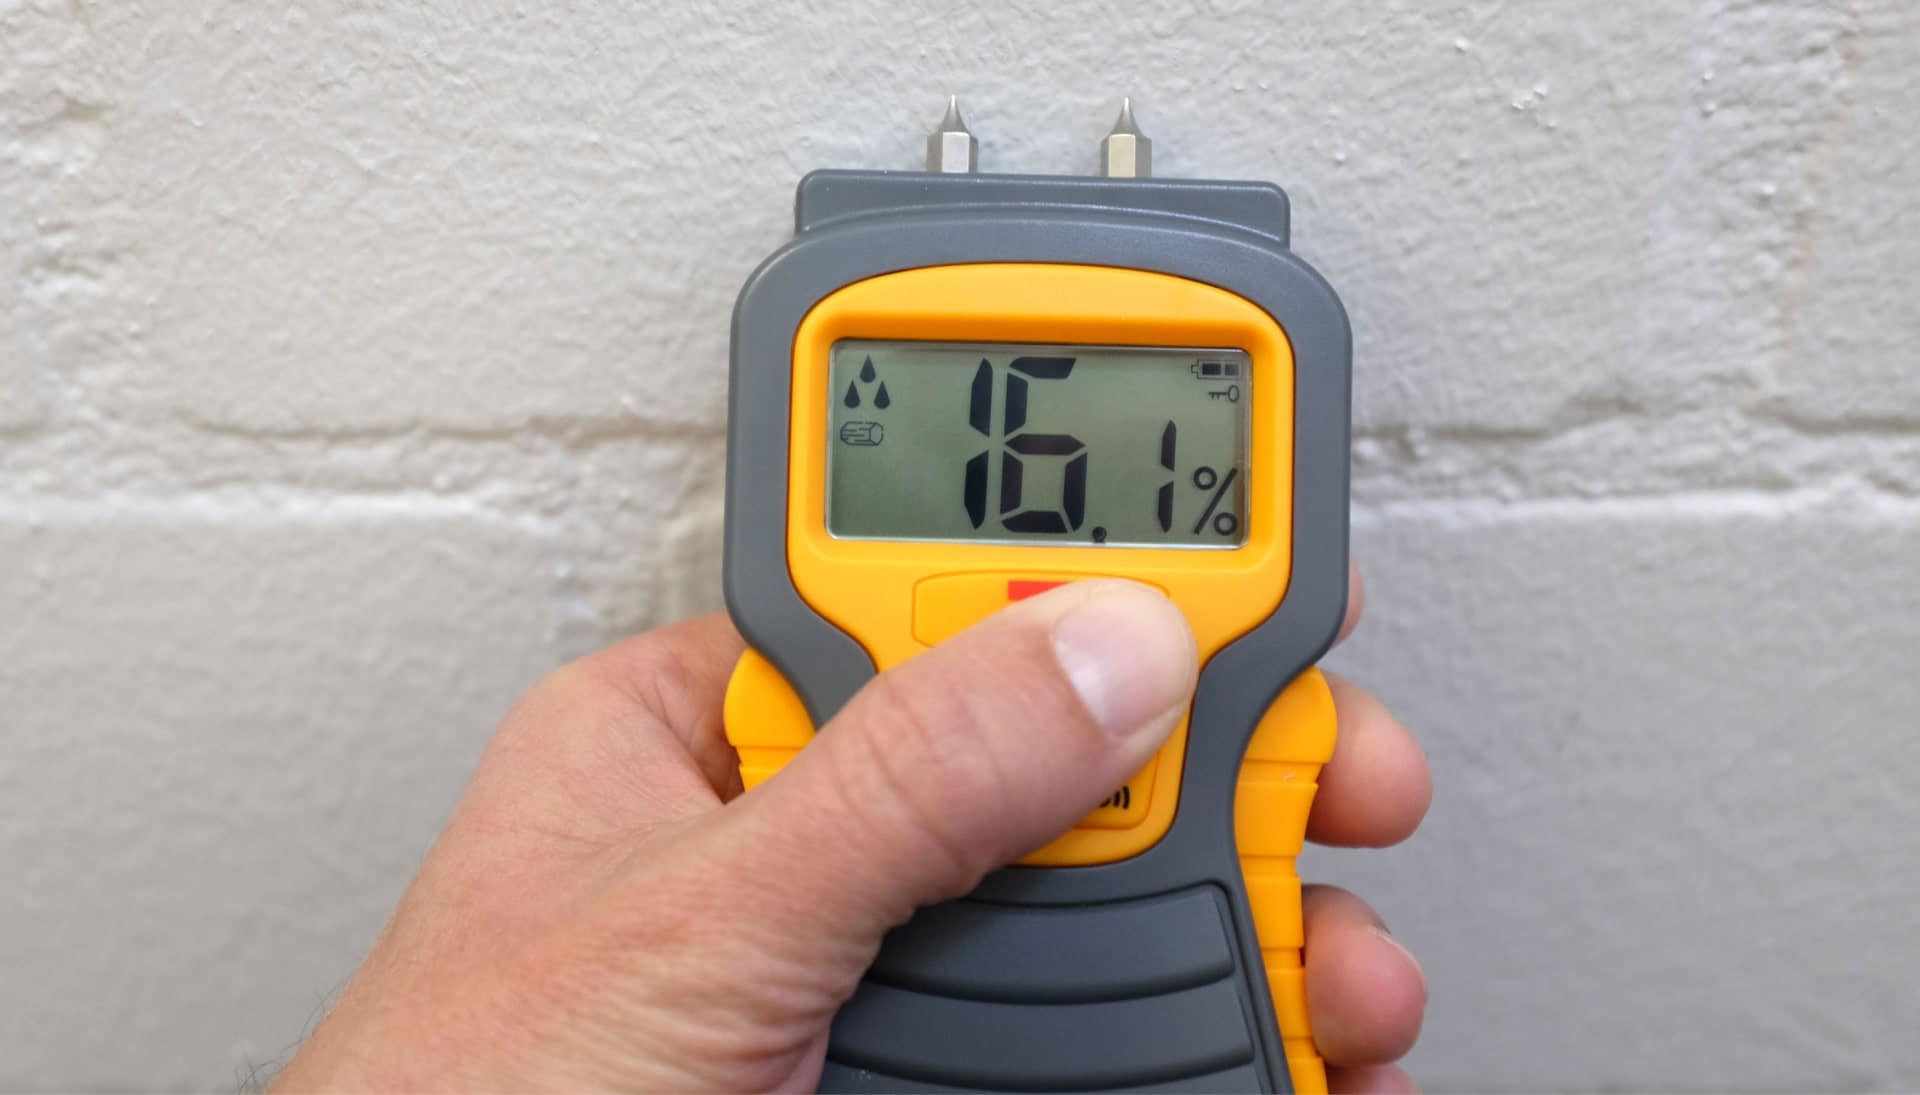 We provide fast, accurate, and affordable mold testing services in St Louis, Missouri.